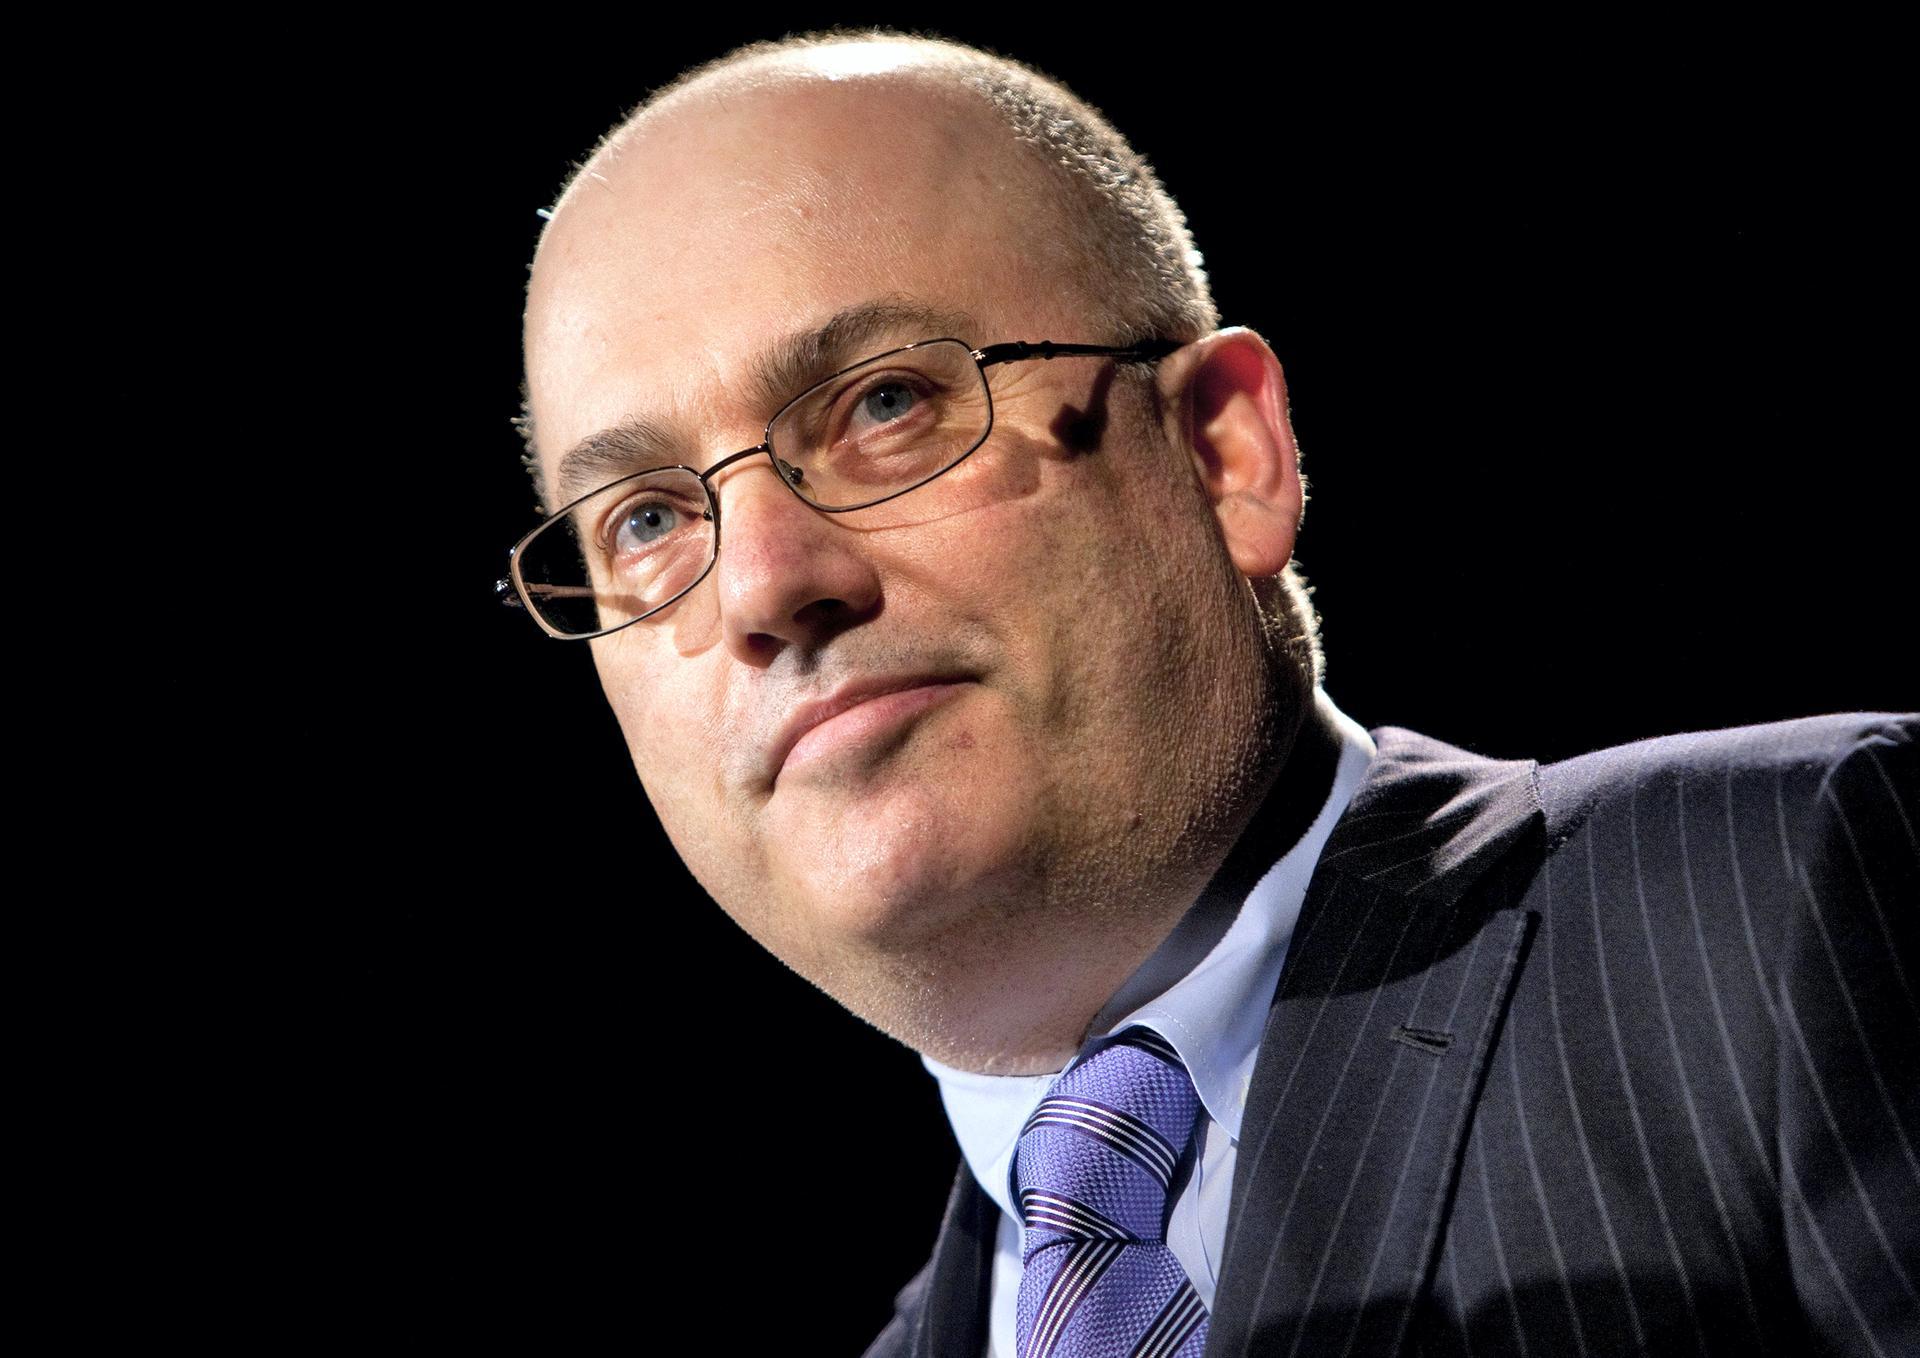 Hedge fund billionaire Steve Cohen outed as buyer of $91m Jeff